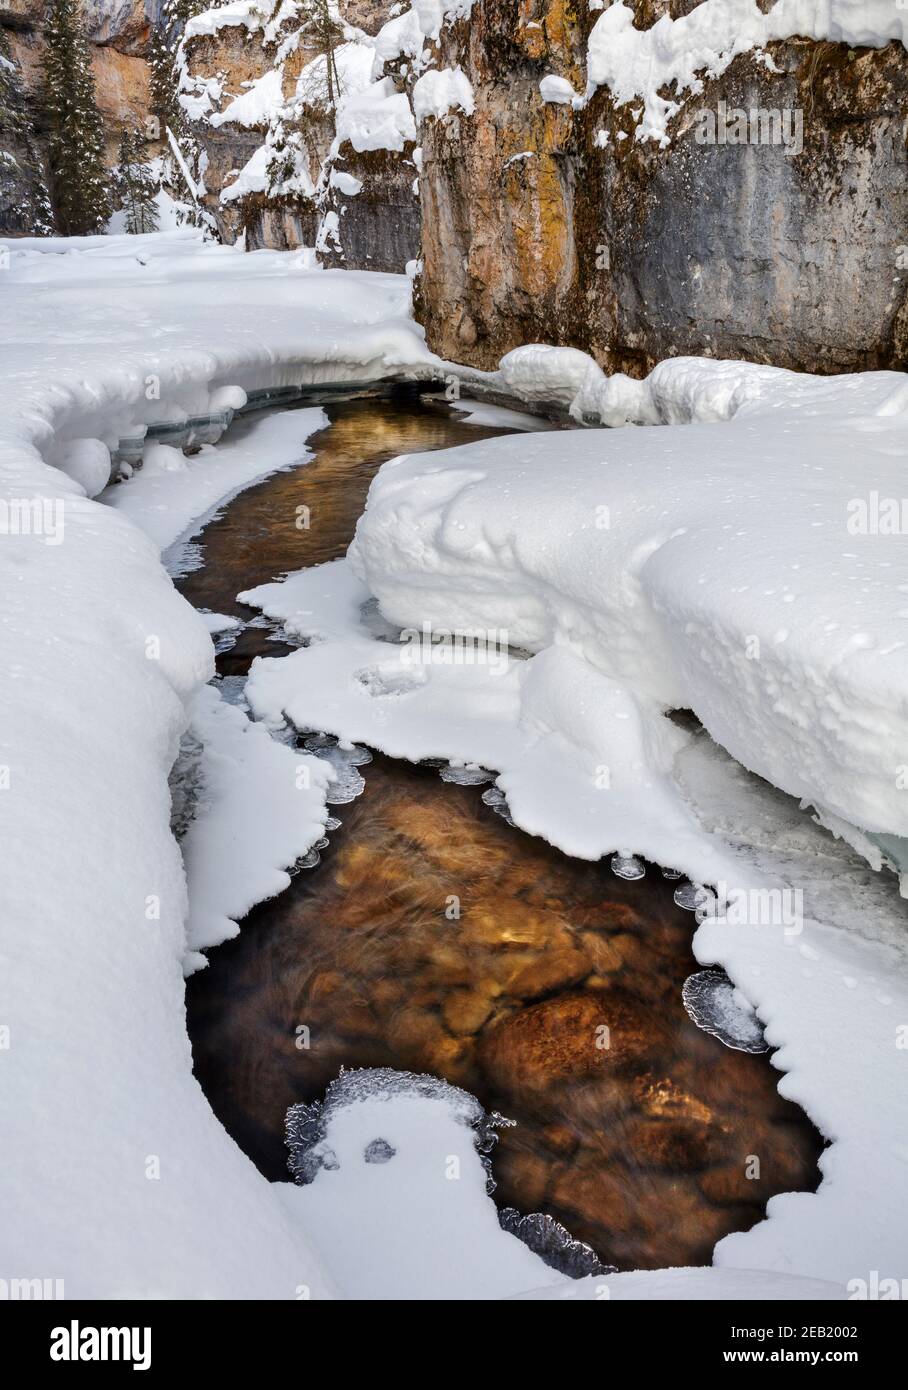 Yellowstone National Park, WY: Flowing water in Pebble Creek in Pebble Creek Canyon Stock Photo